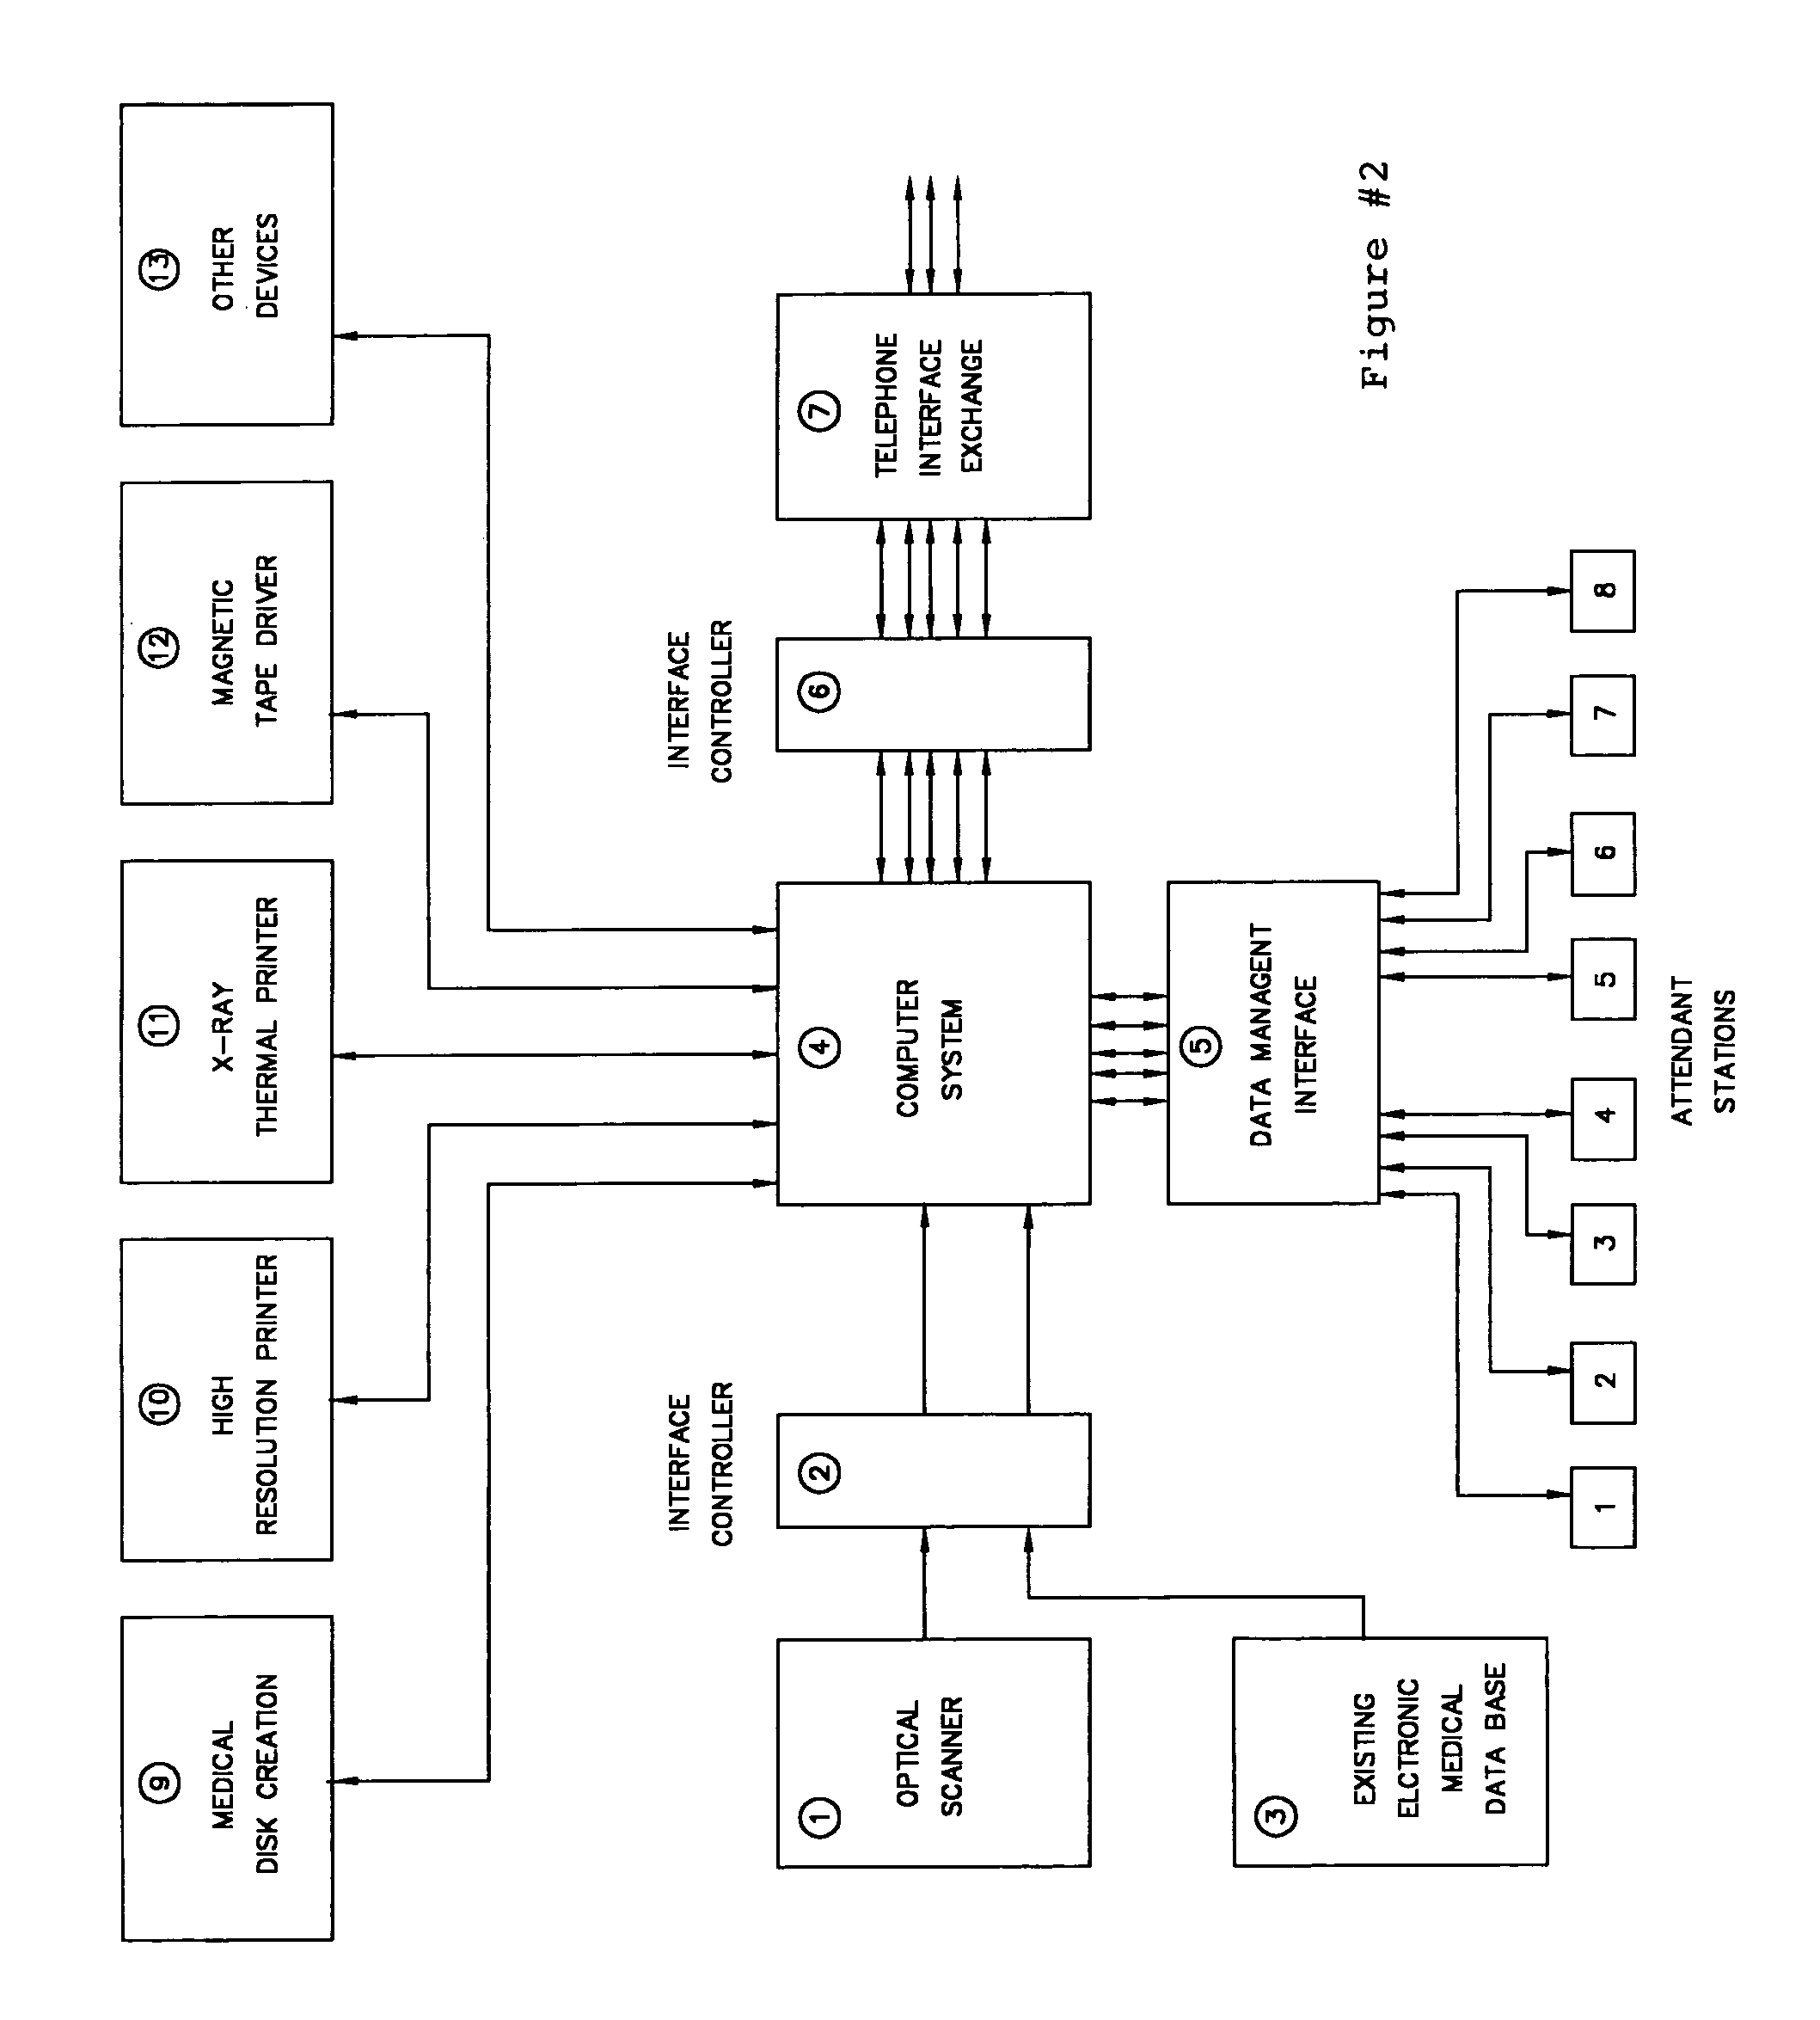 Computer system for optical scanning, storage, organization, authentication and electronic transmitting and receiving of medical records and patient information, and other sensitive legal documents